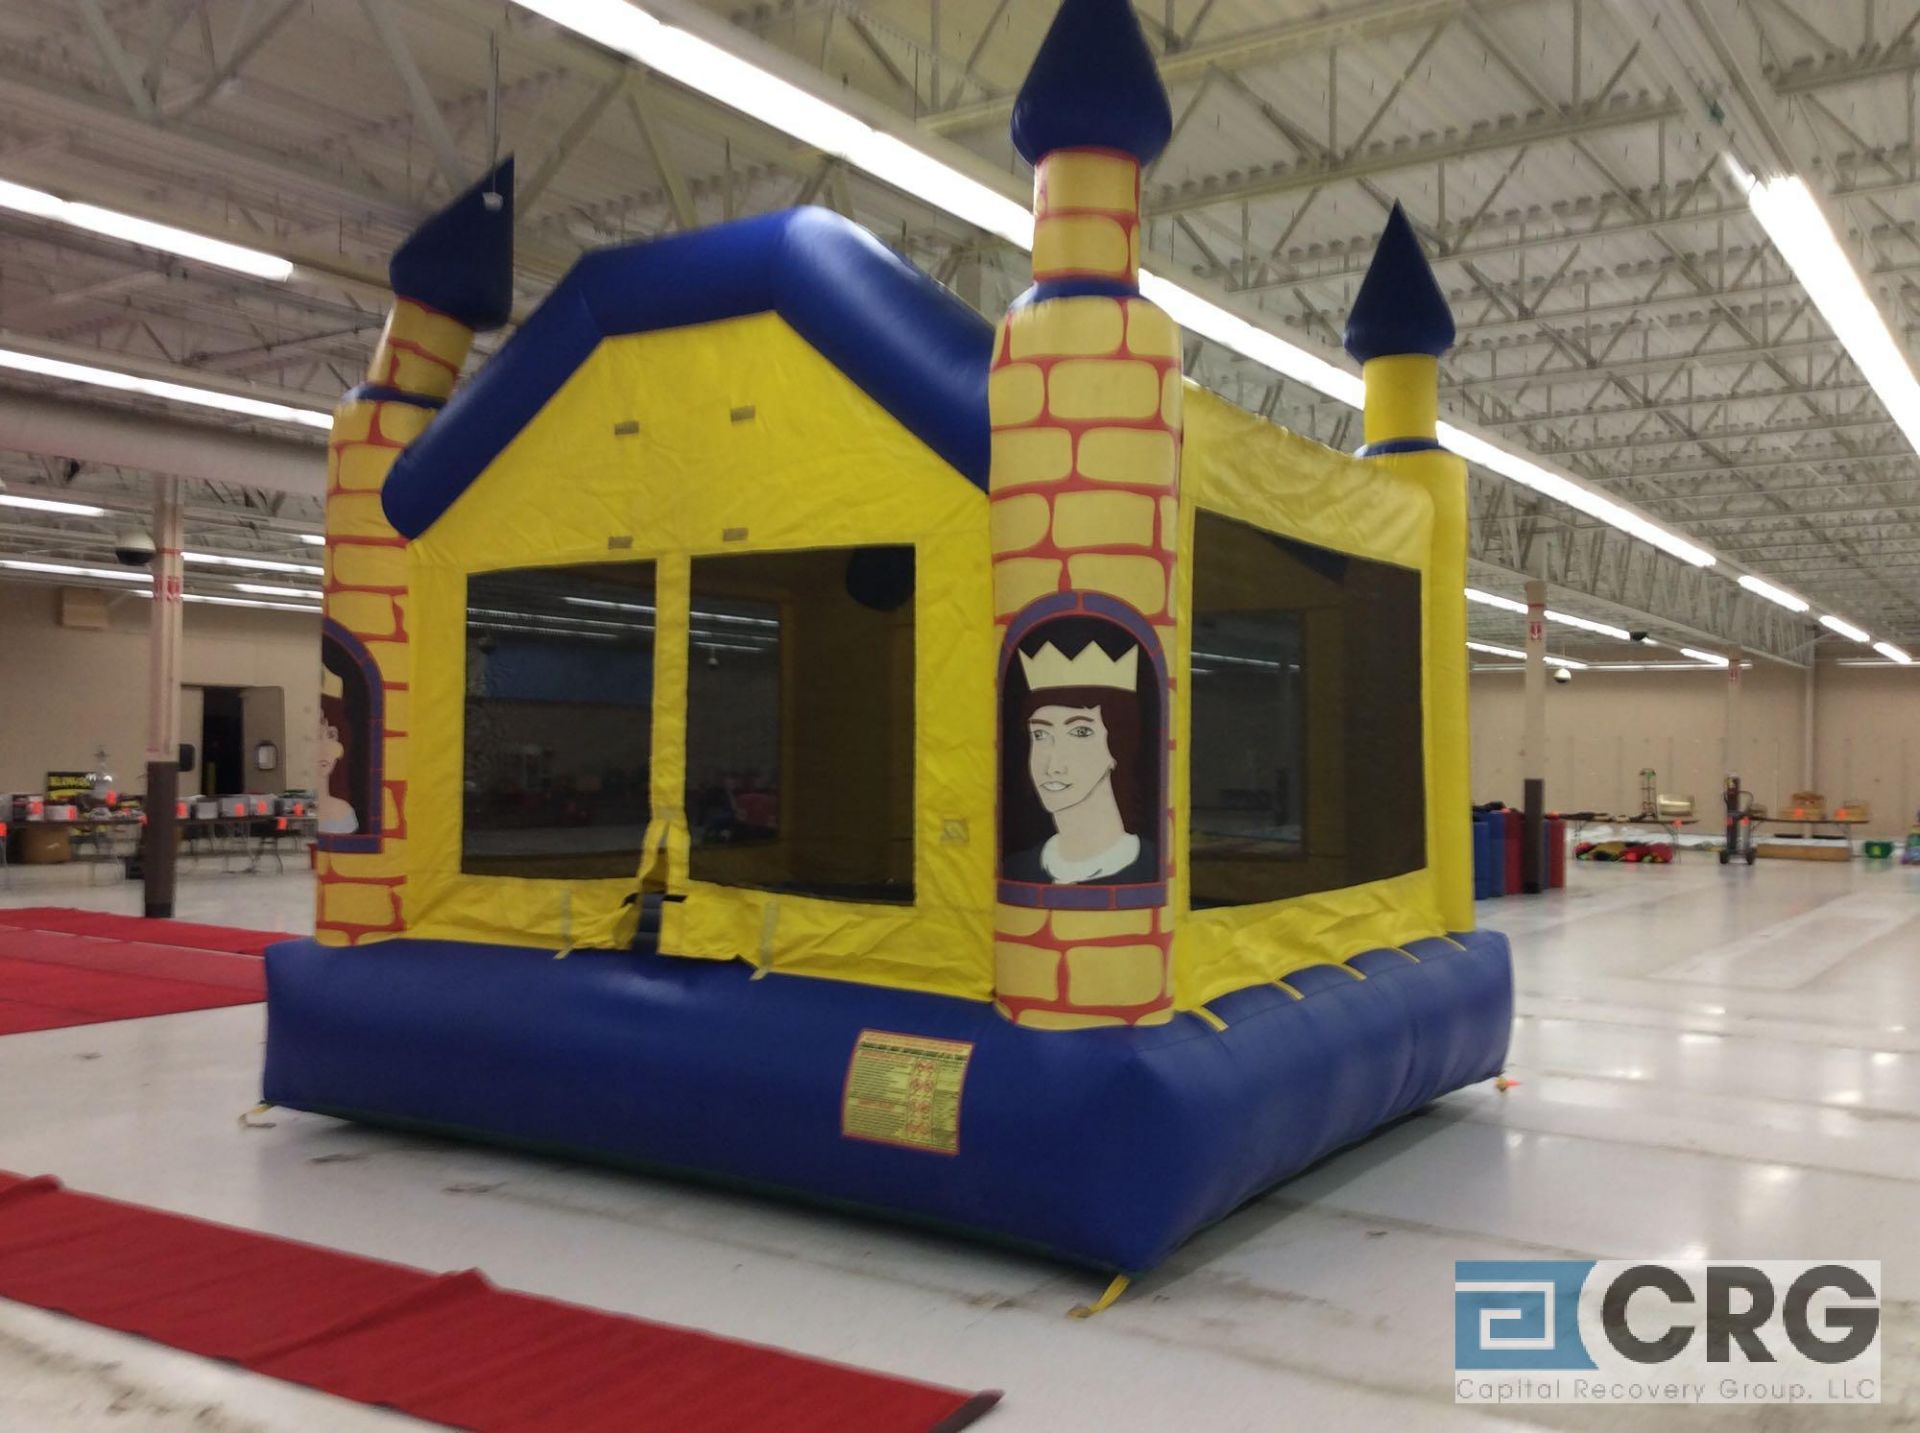 Castle type inflatable bounce house, with blower.